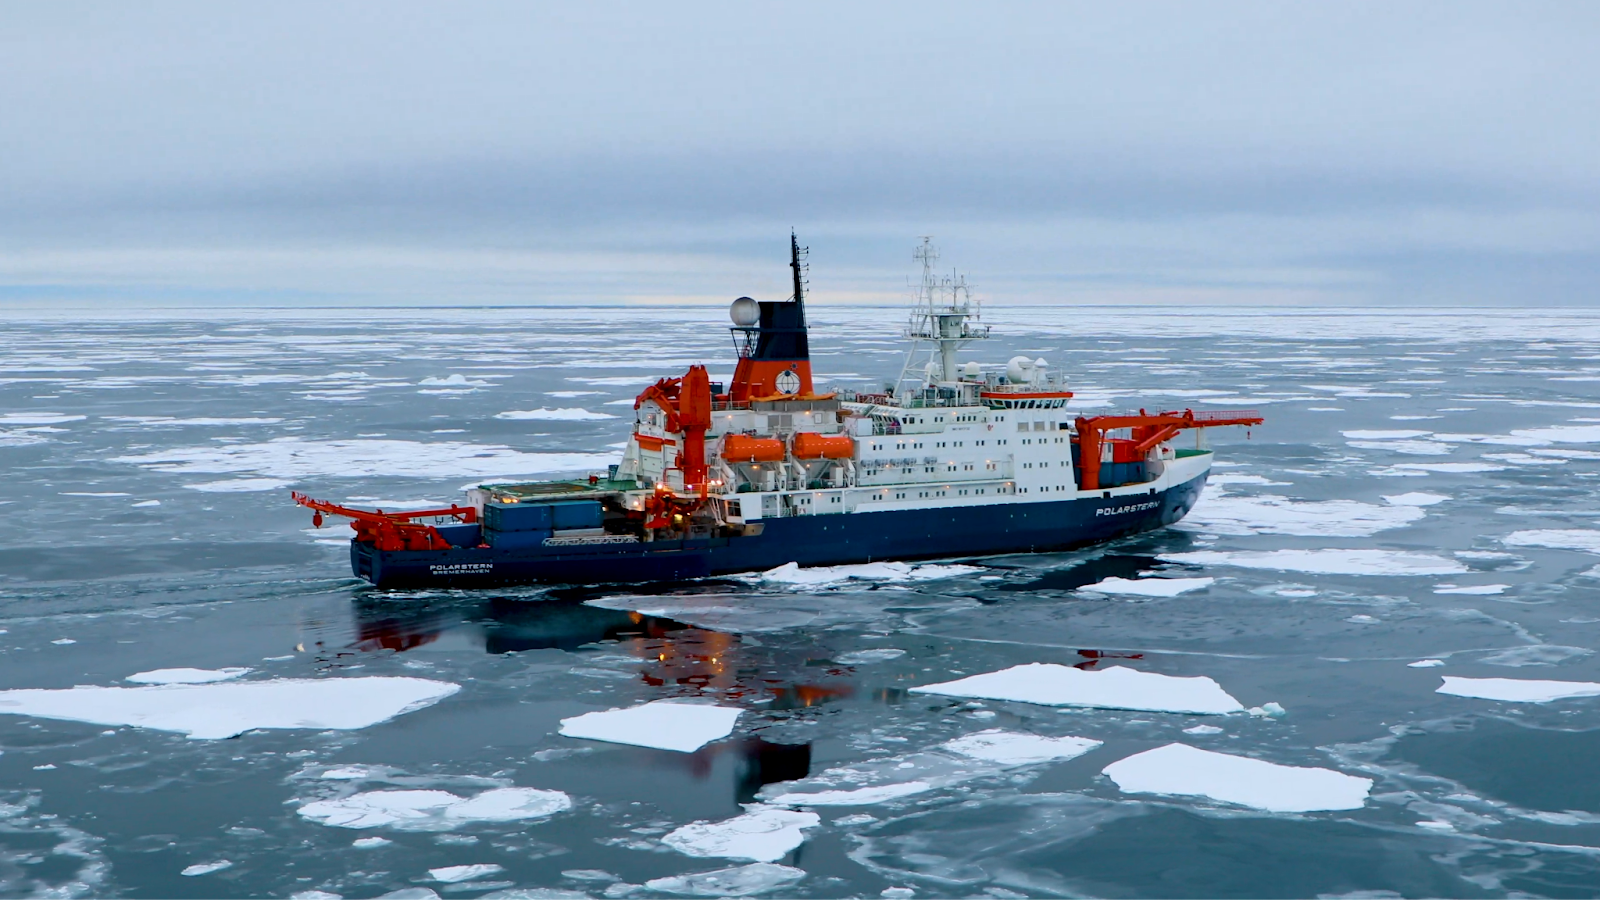 A research vessel sails through ice floes in the Arctic Ocean. Photo by Amy Lauren.